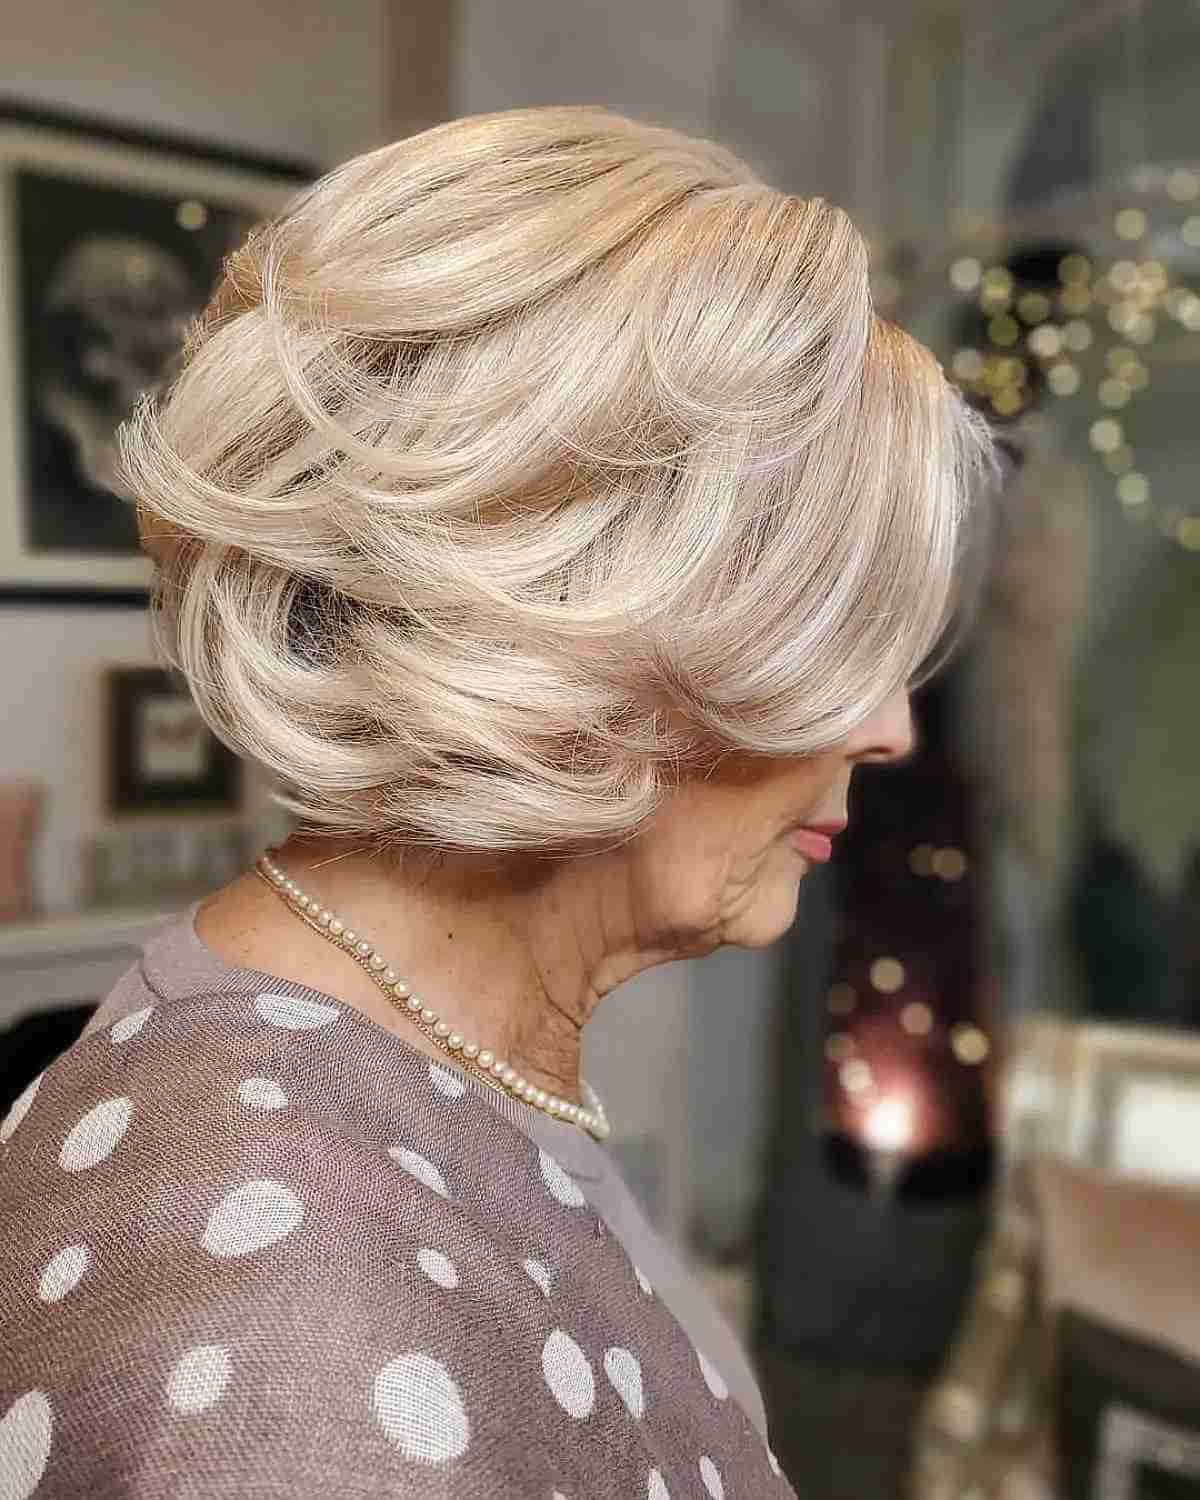 Timeless Short-Length Feathered Hair for a Lady in Her 70s